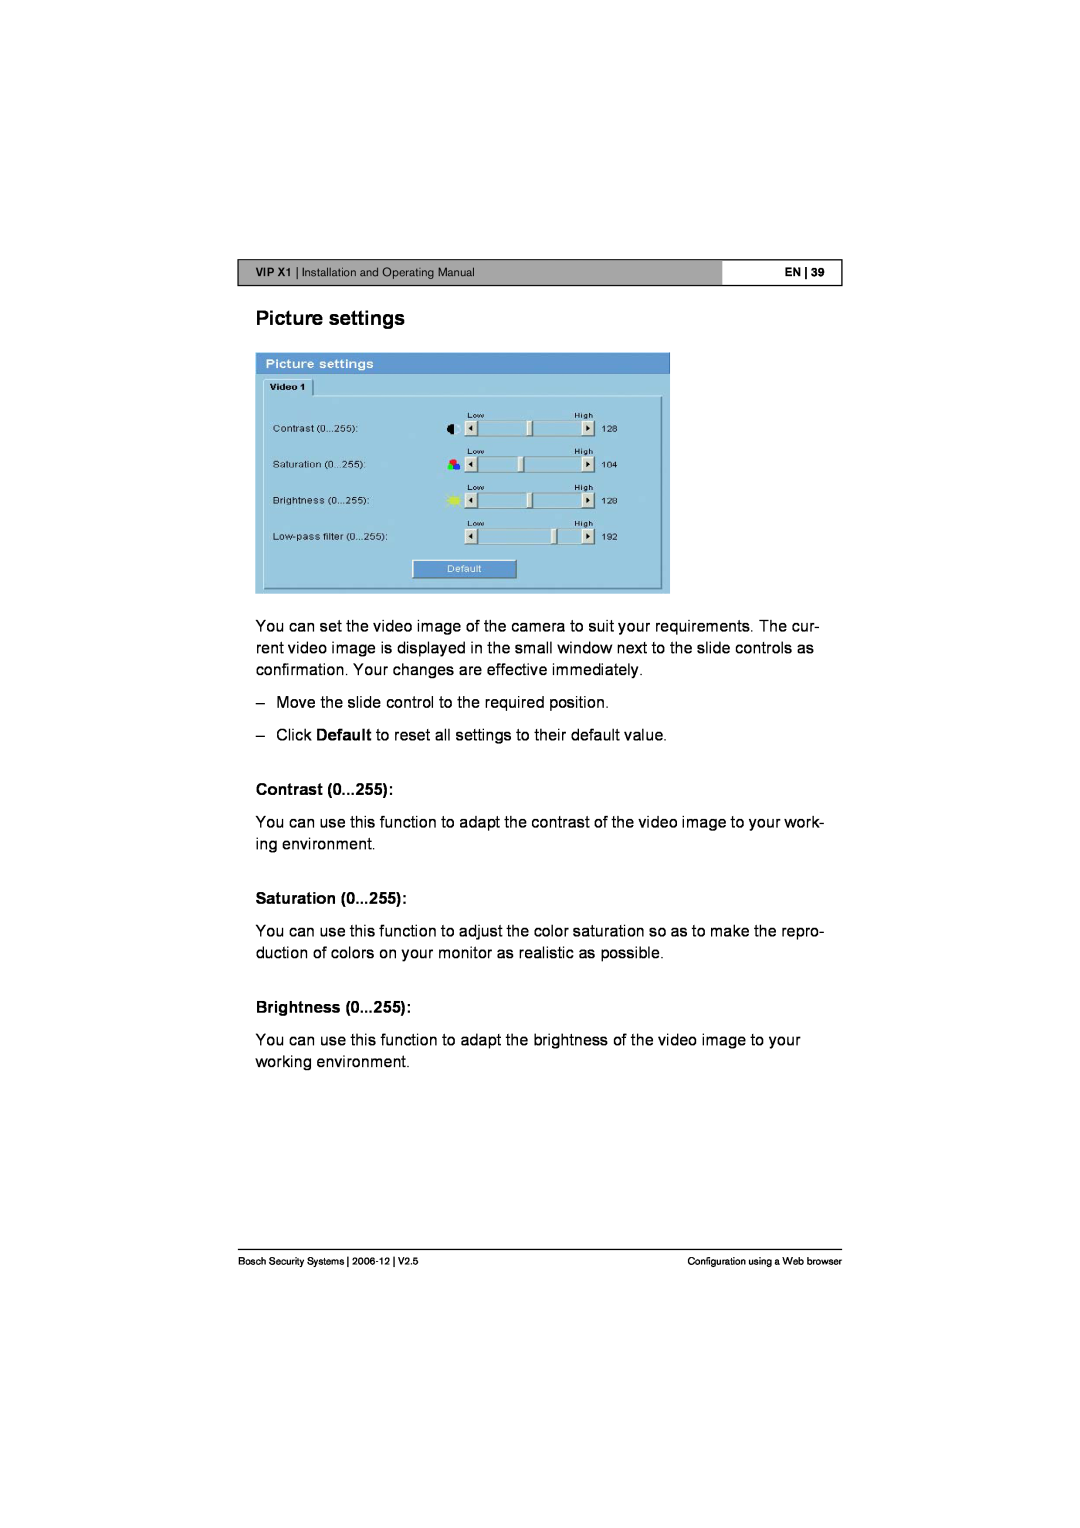 Bosch Appliances VIP X1 manual Picture settings, Contrast, Saturation, Brightness 